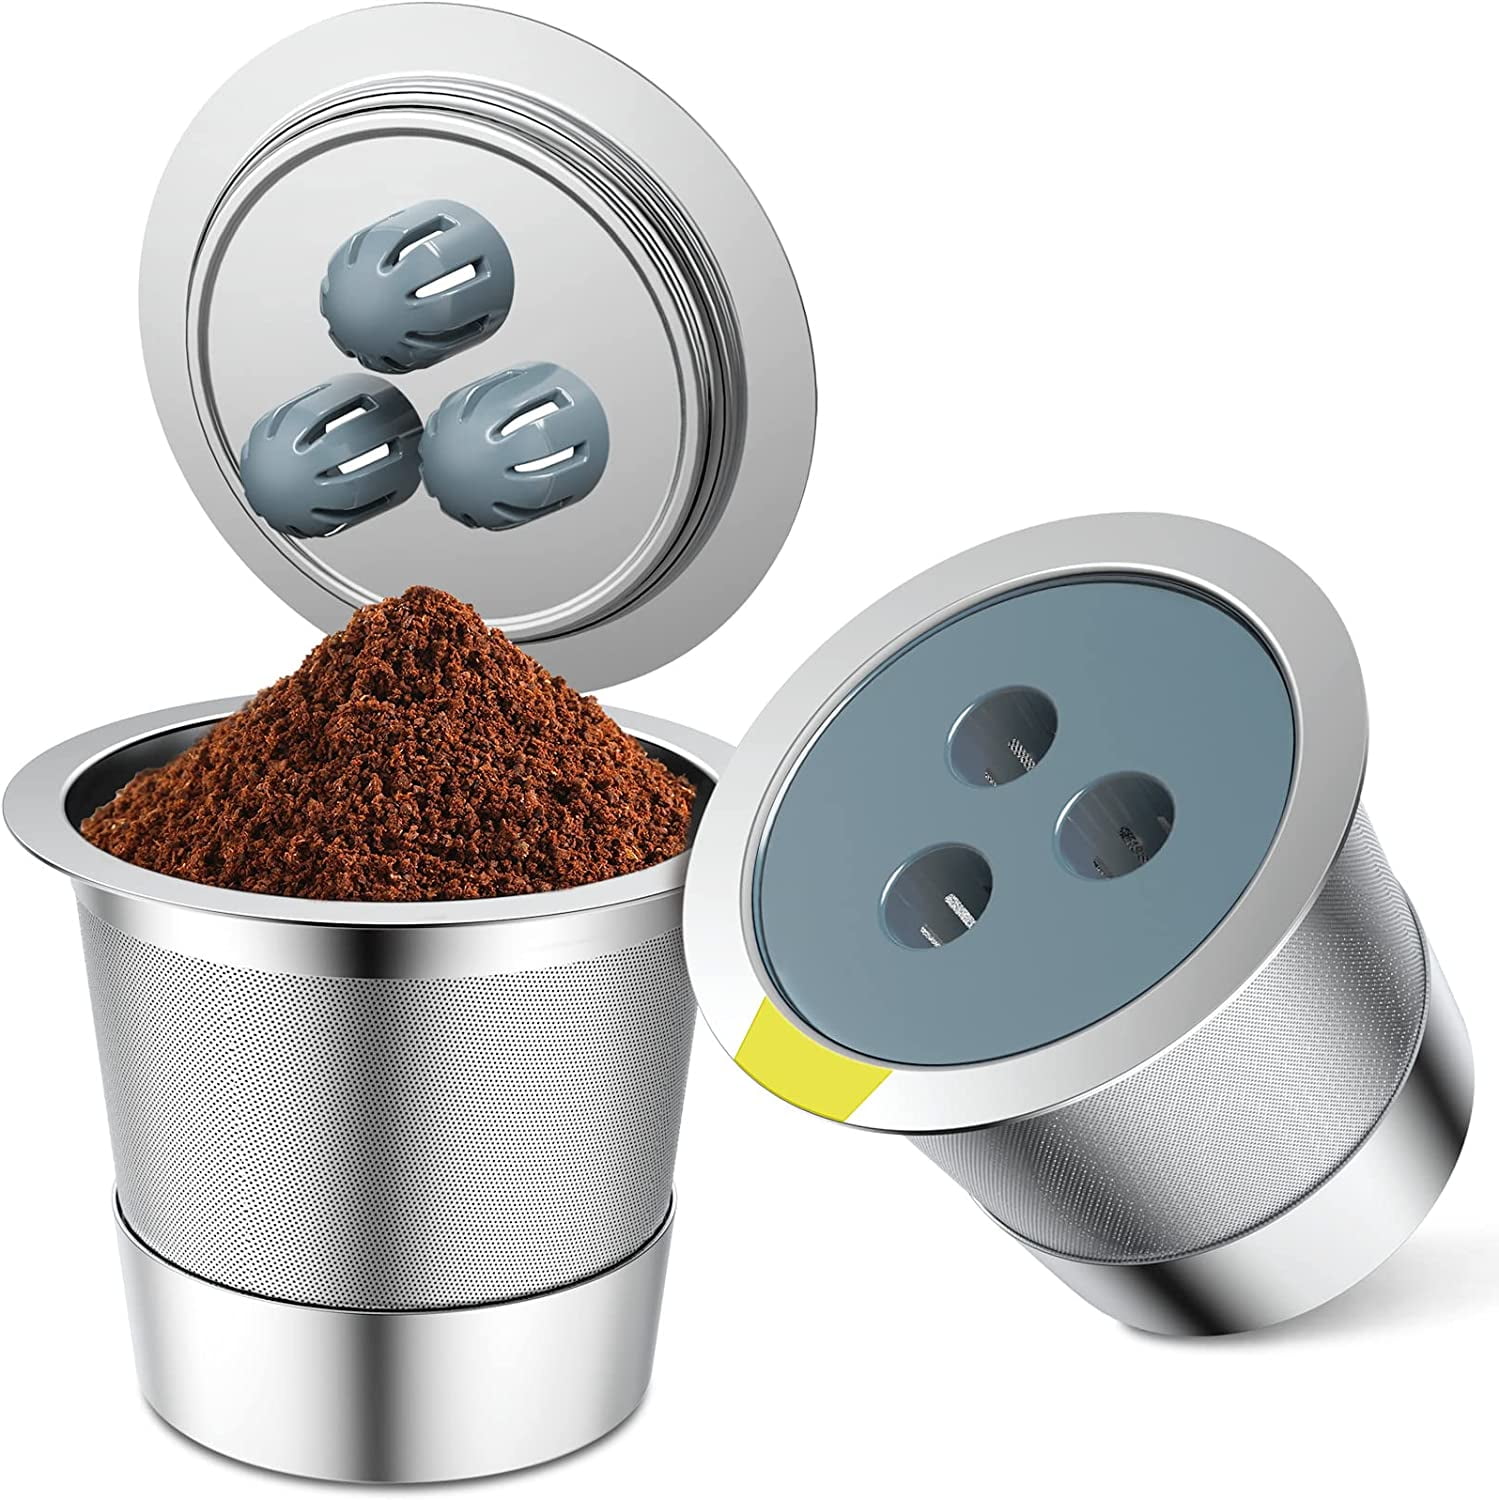 Stainless Steel Reusable K Cups Compatible with Ninja Coffee Maker